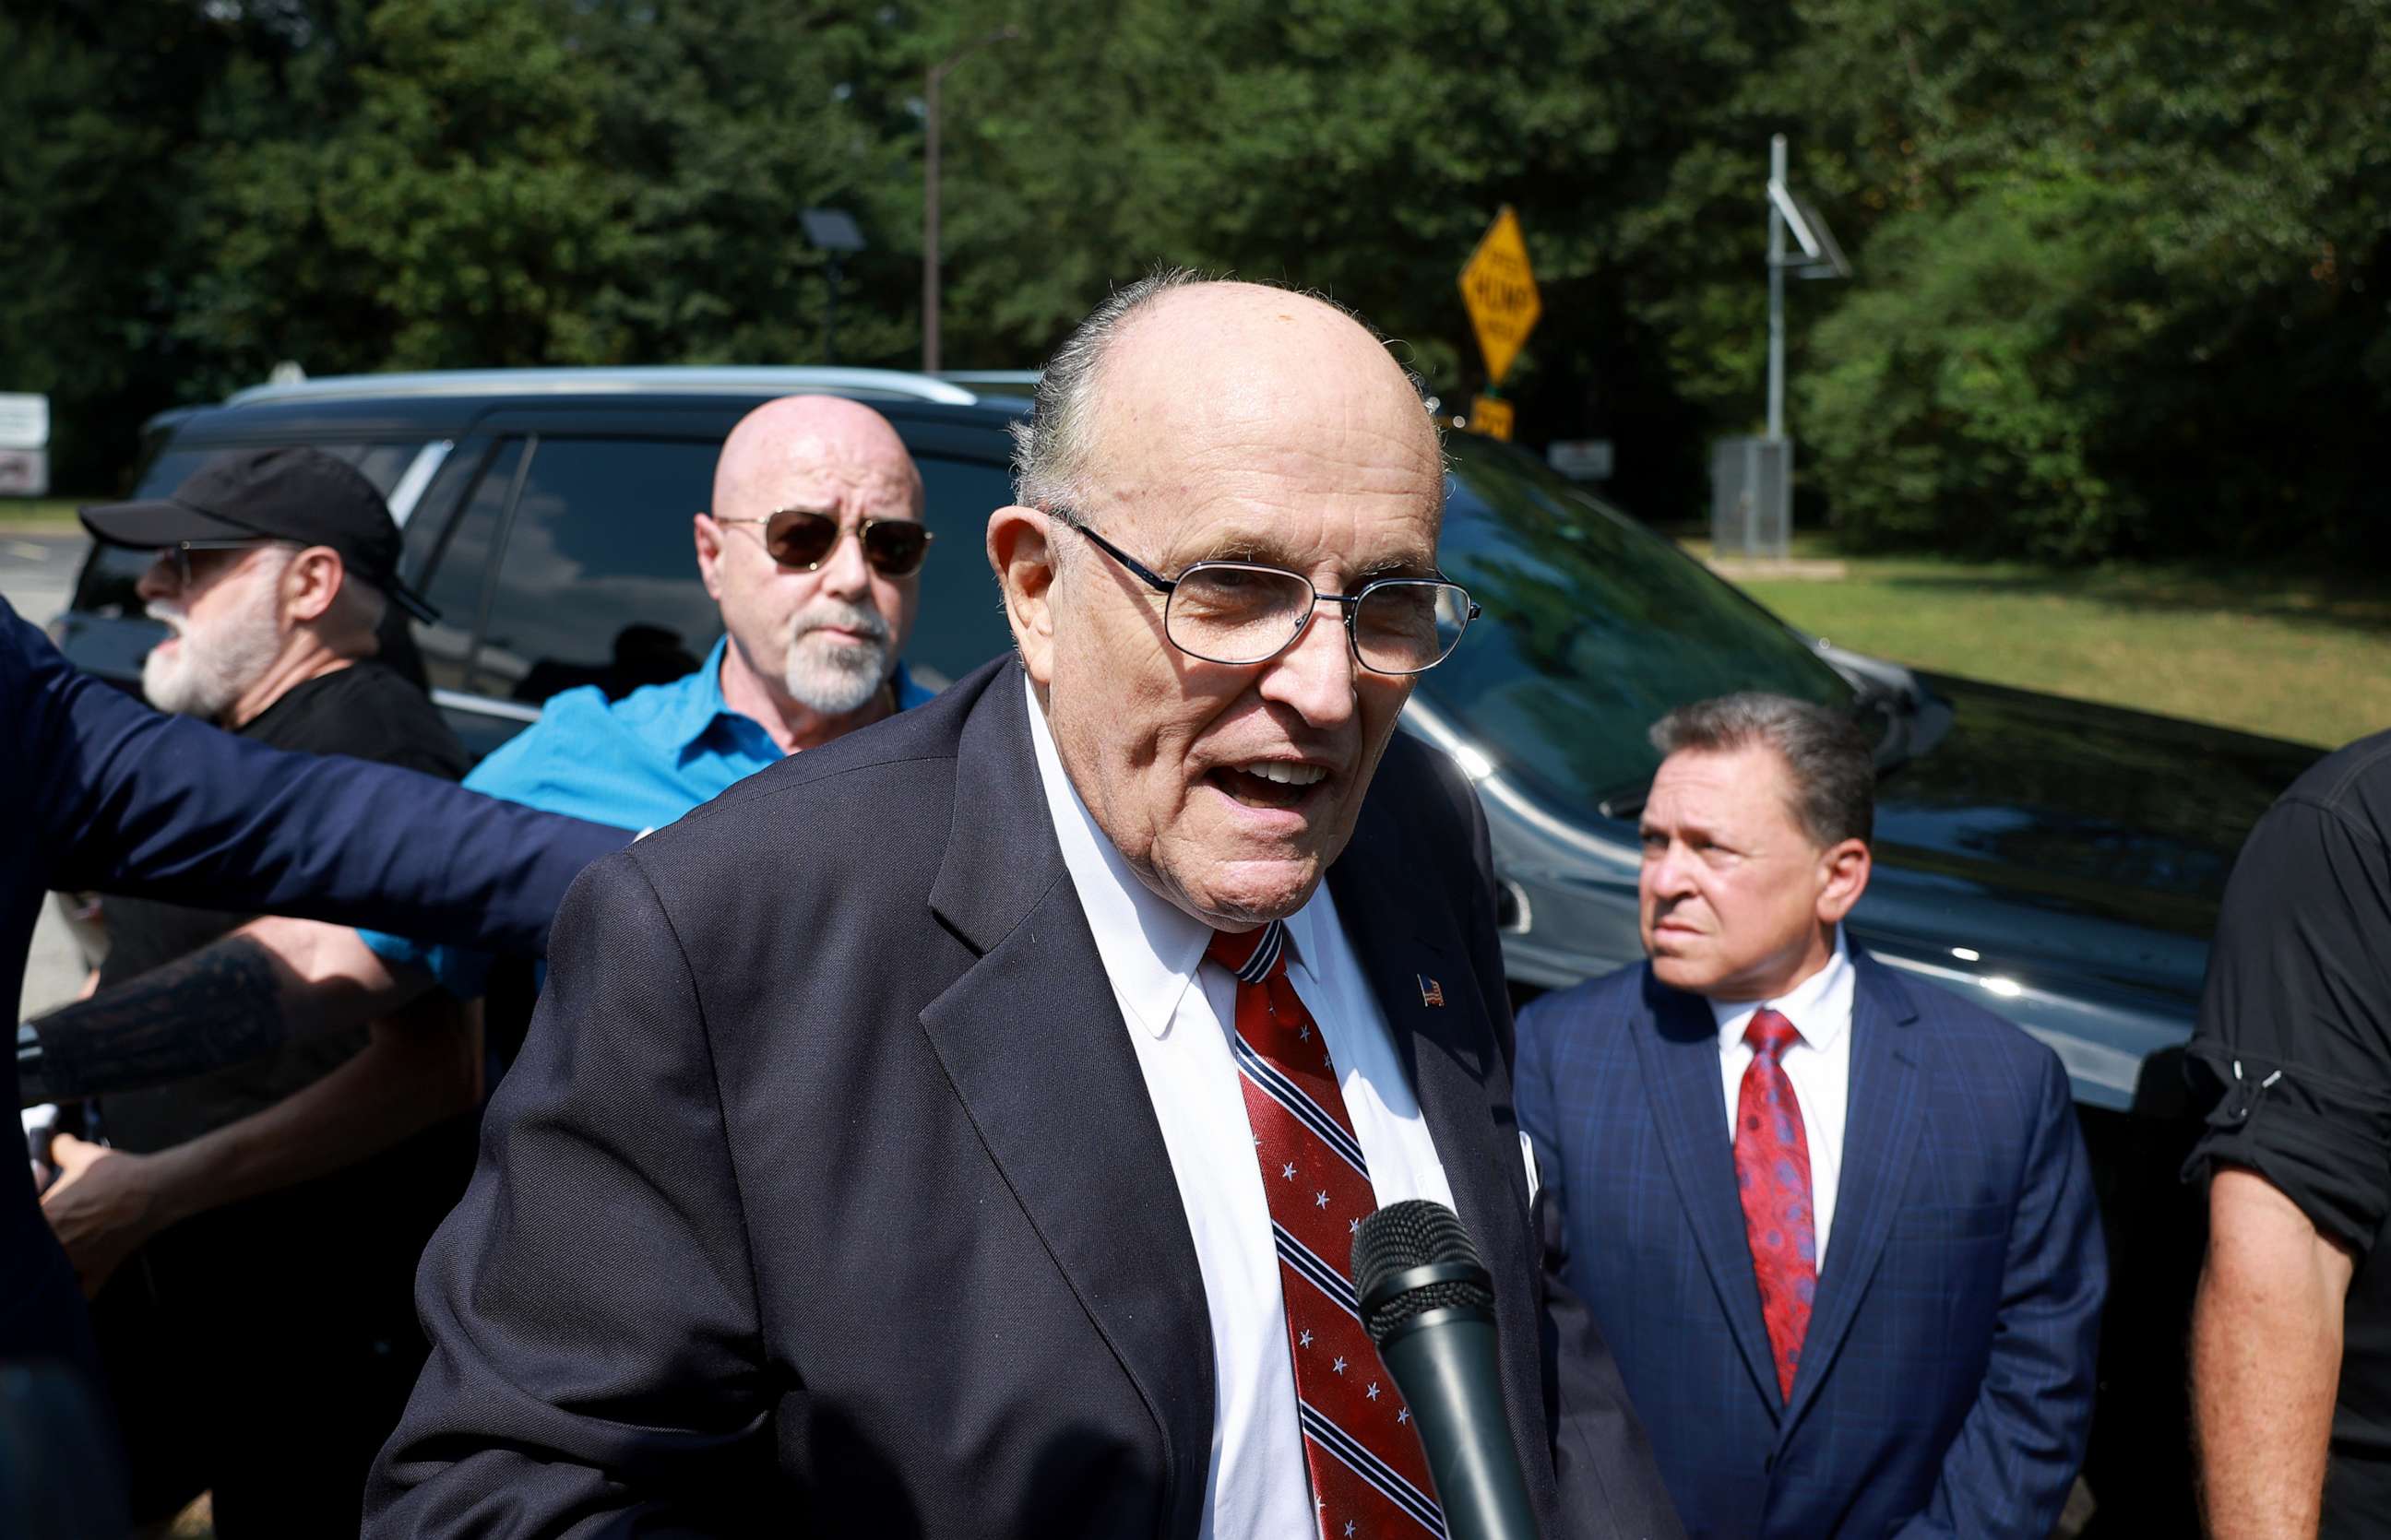 Rudy Giuliani speaks to the media after leaving the Fulton County jail on August 23, 2023 in Atlanta, Georgia. (Photo by Joe Raedle/Getty Images)